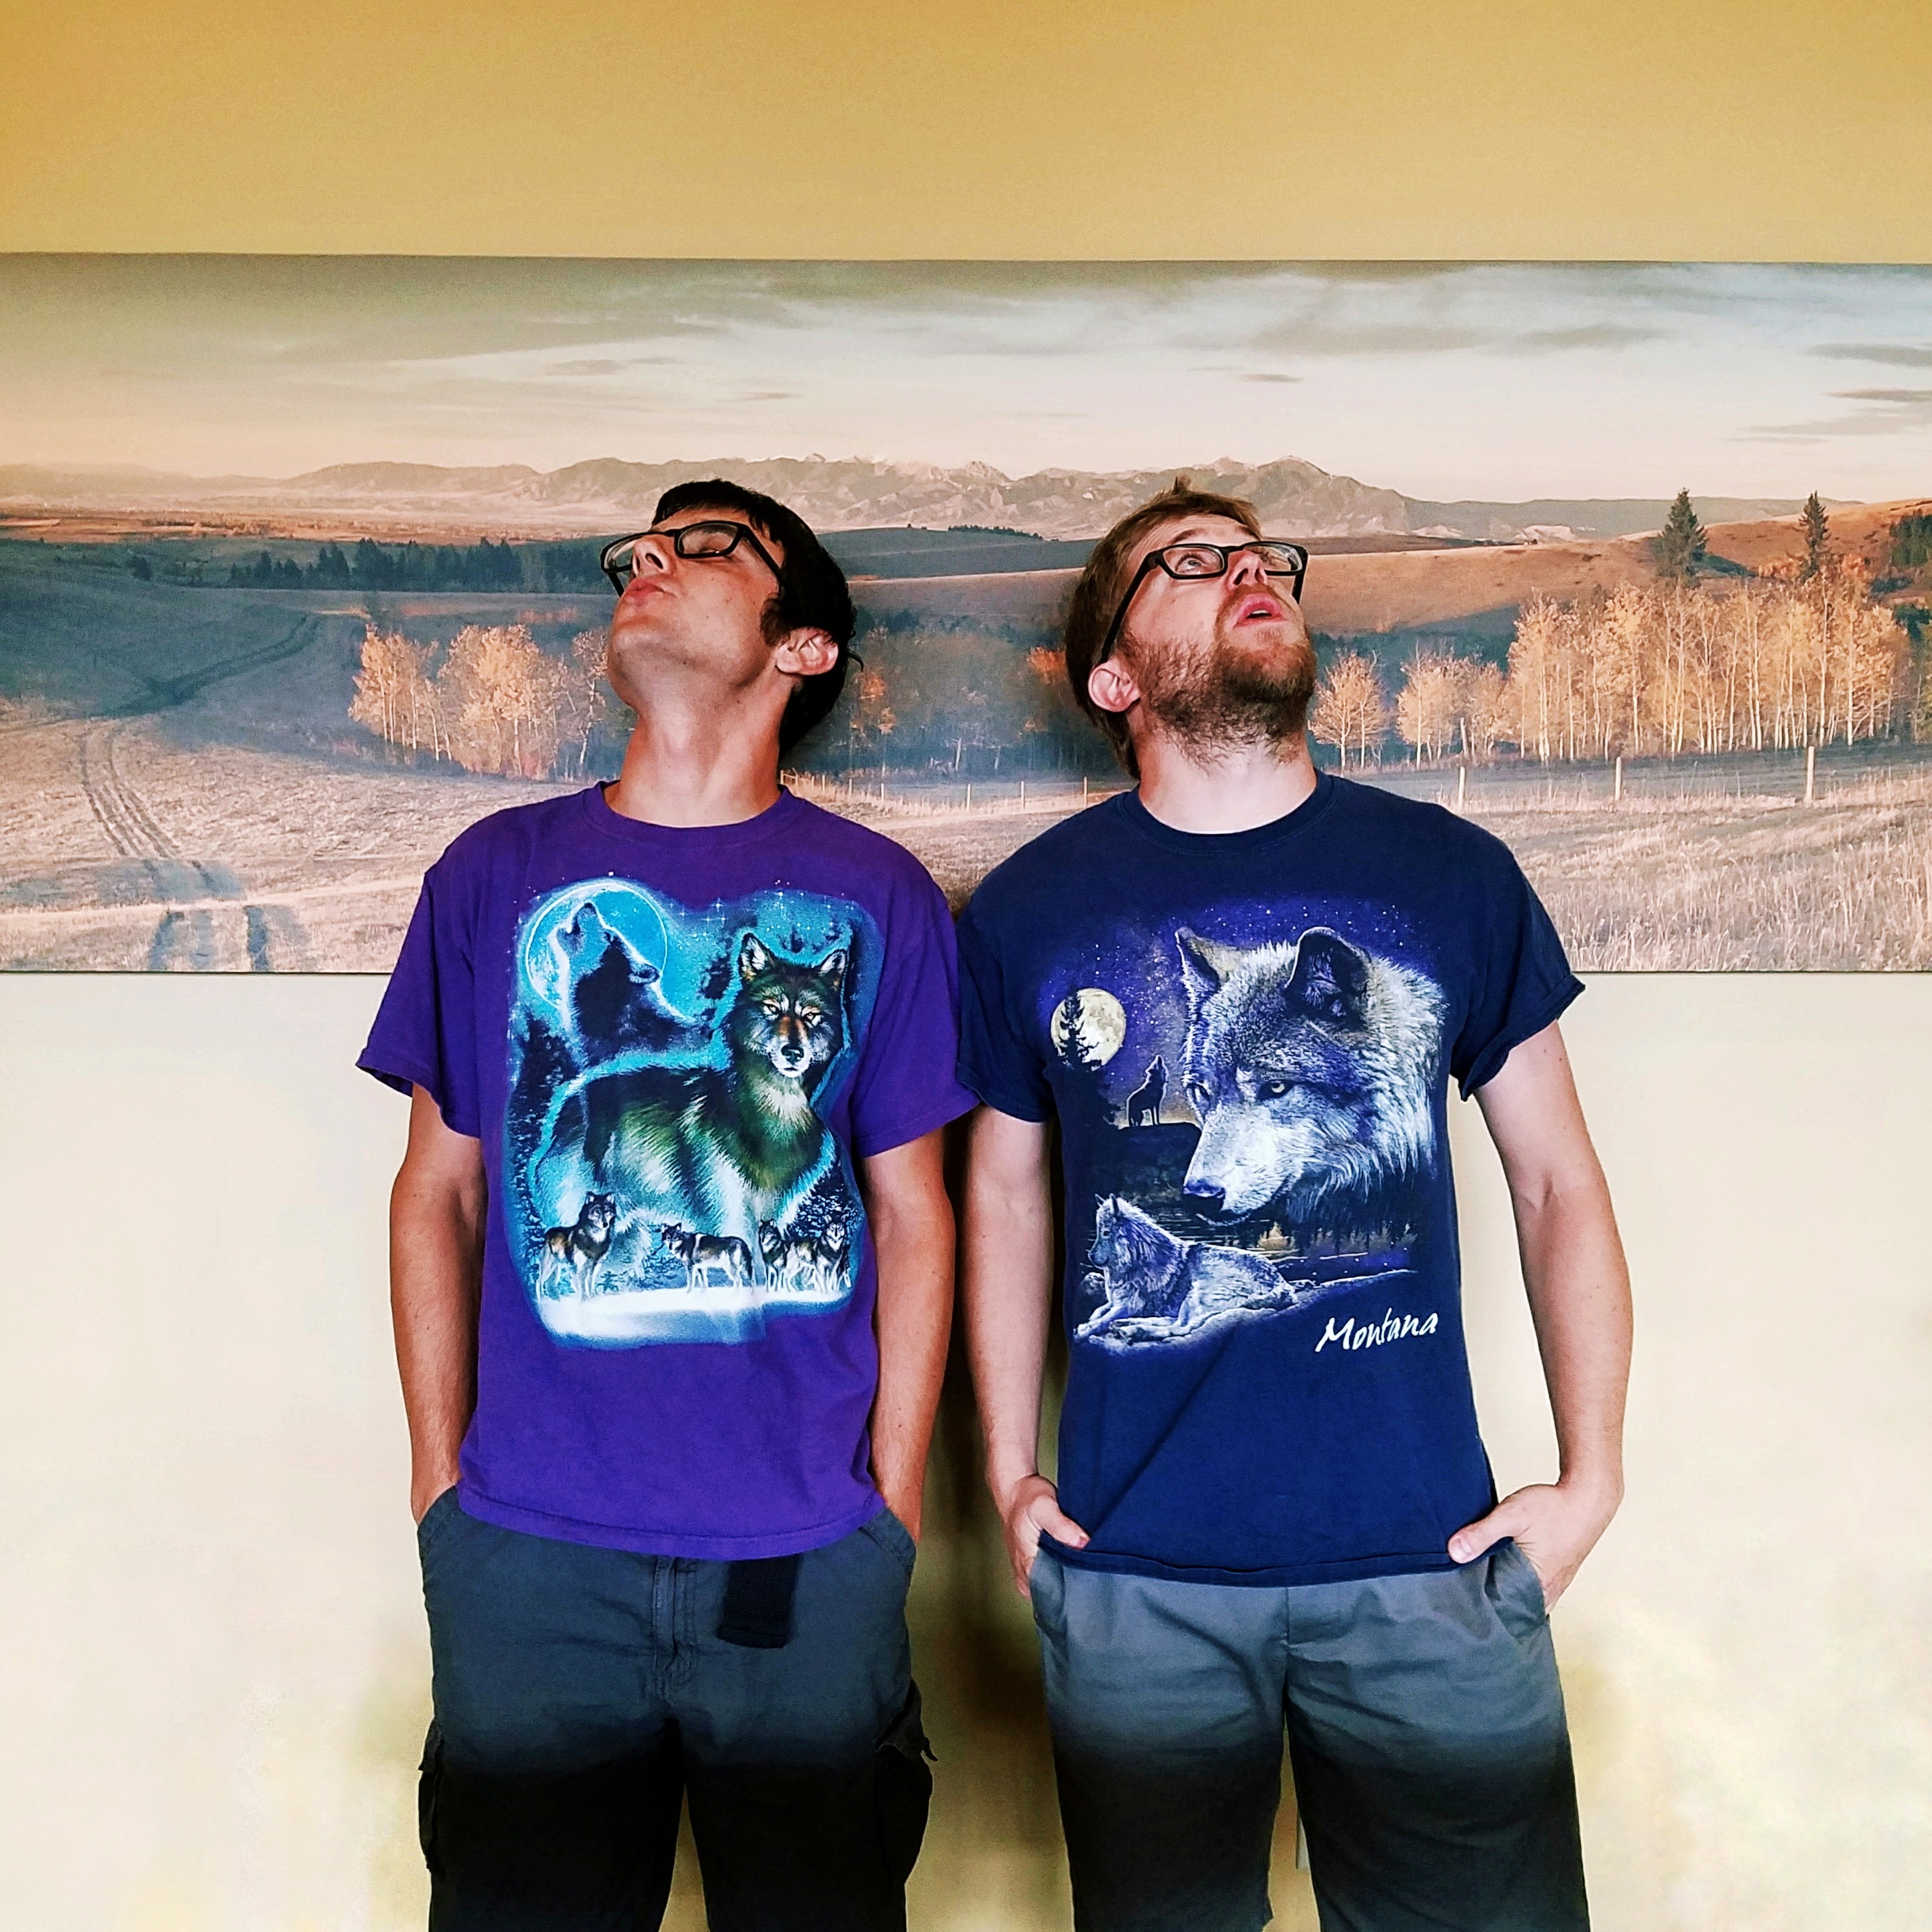 Two members of the TRG team embrace their wild side on wolf shirt Wednesday.